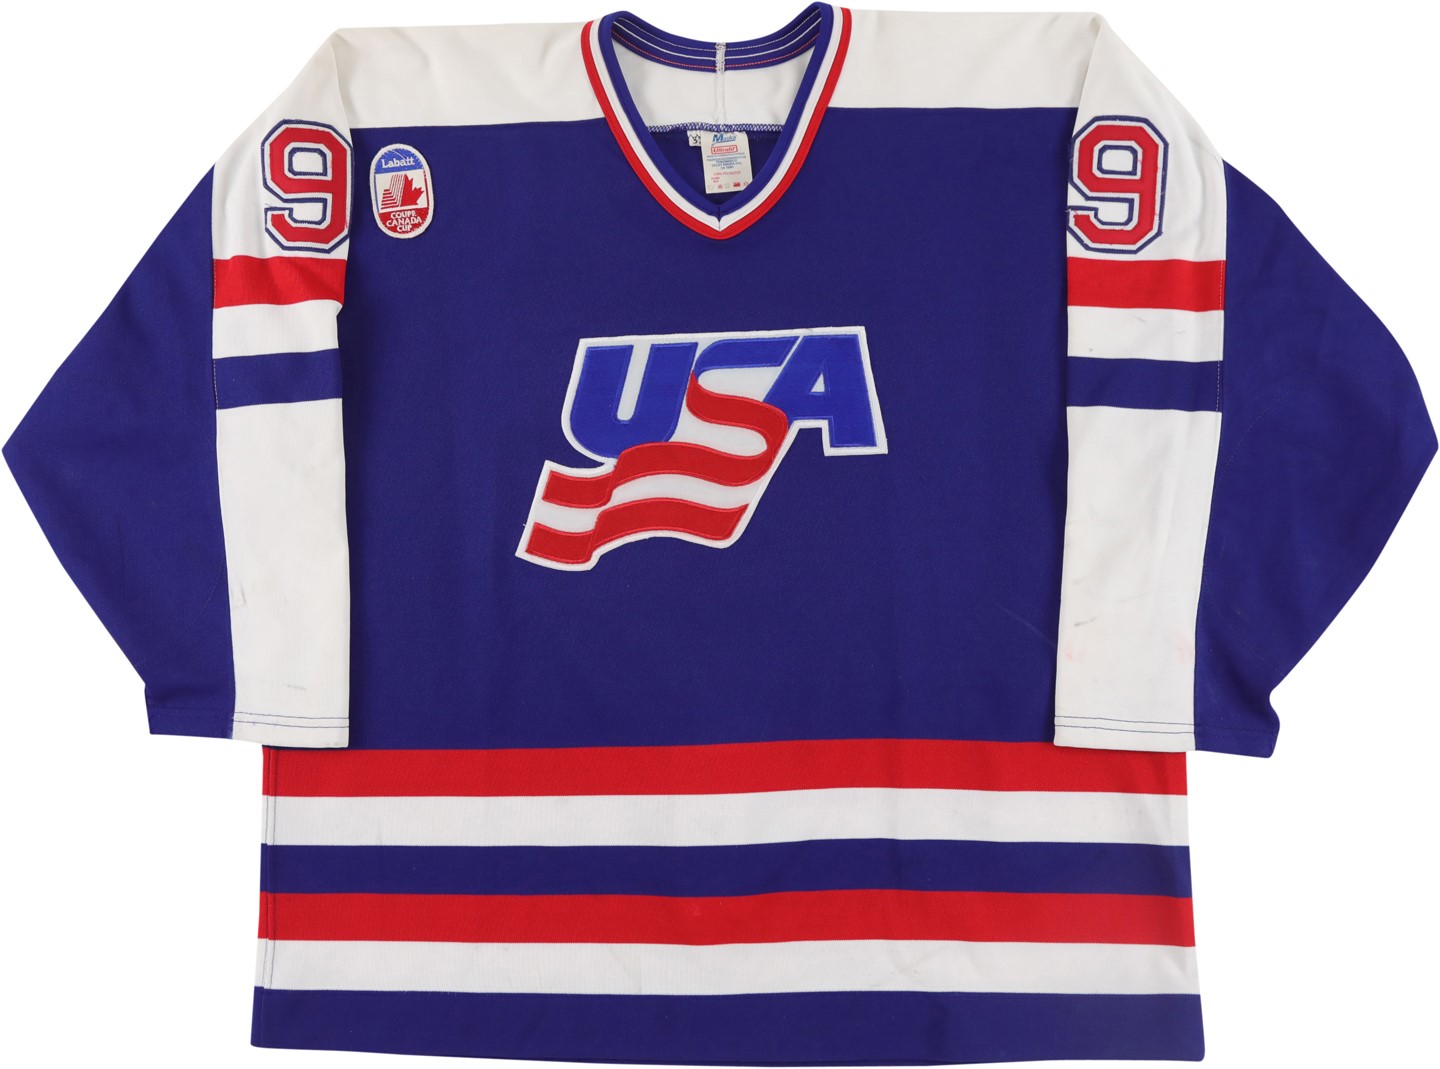 Hockey - 1991 Mike Modano Team USA World Cup Game Worn Jersey - Silver Medal